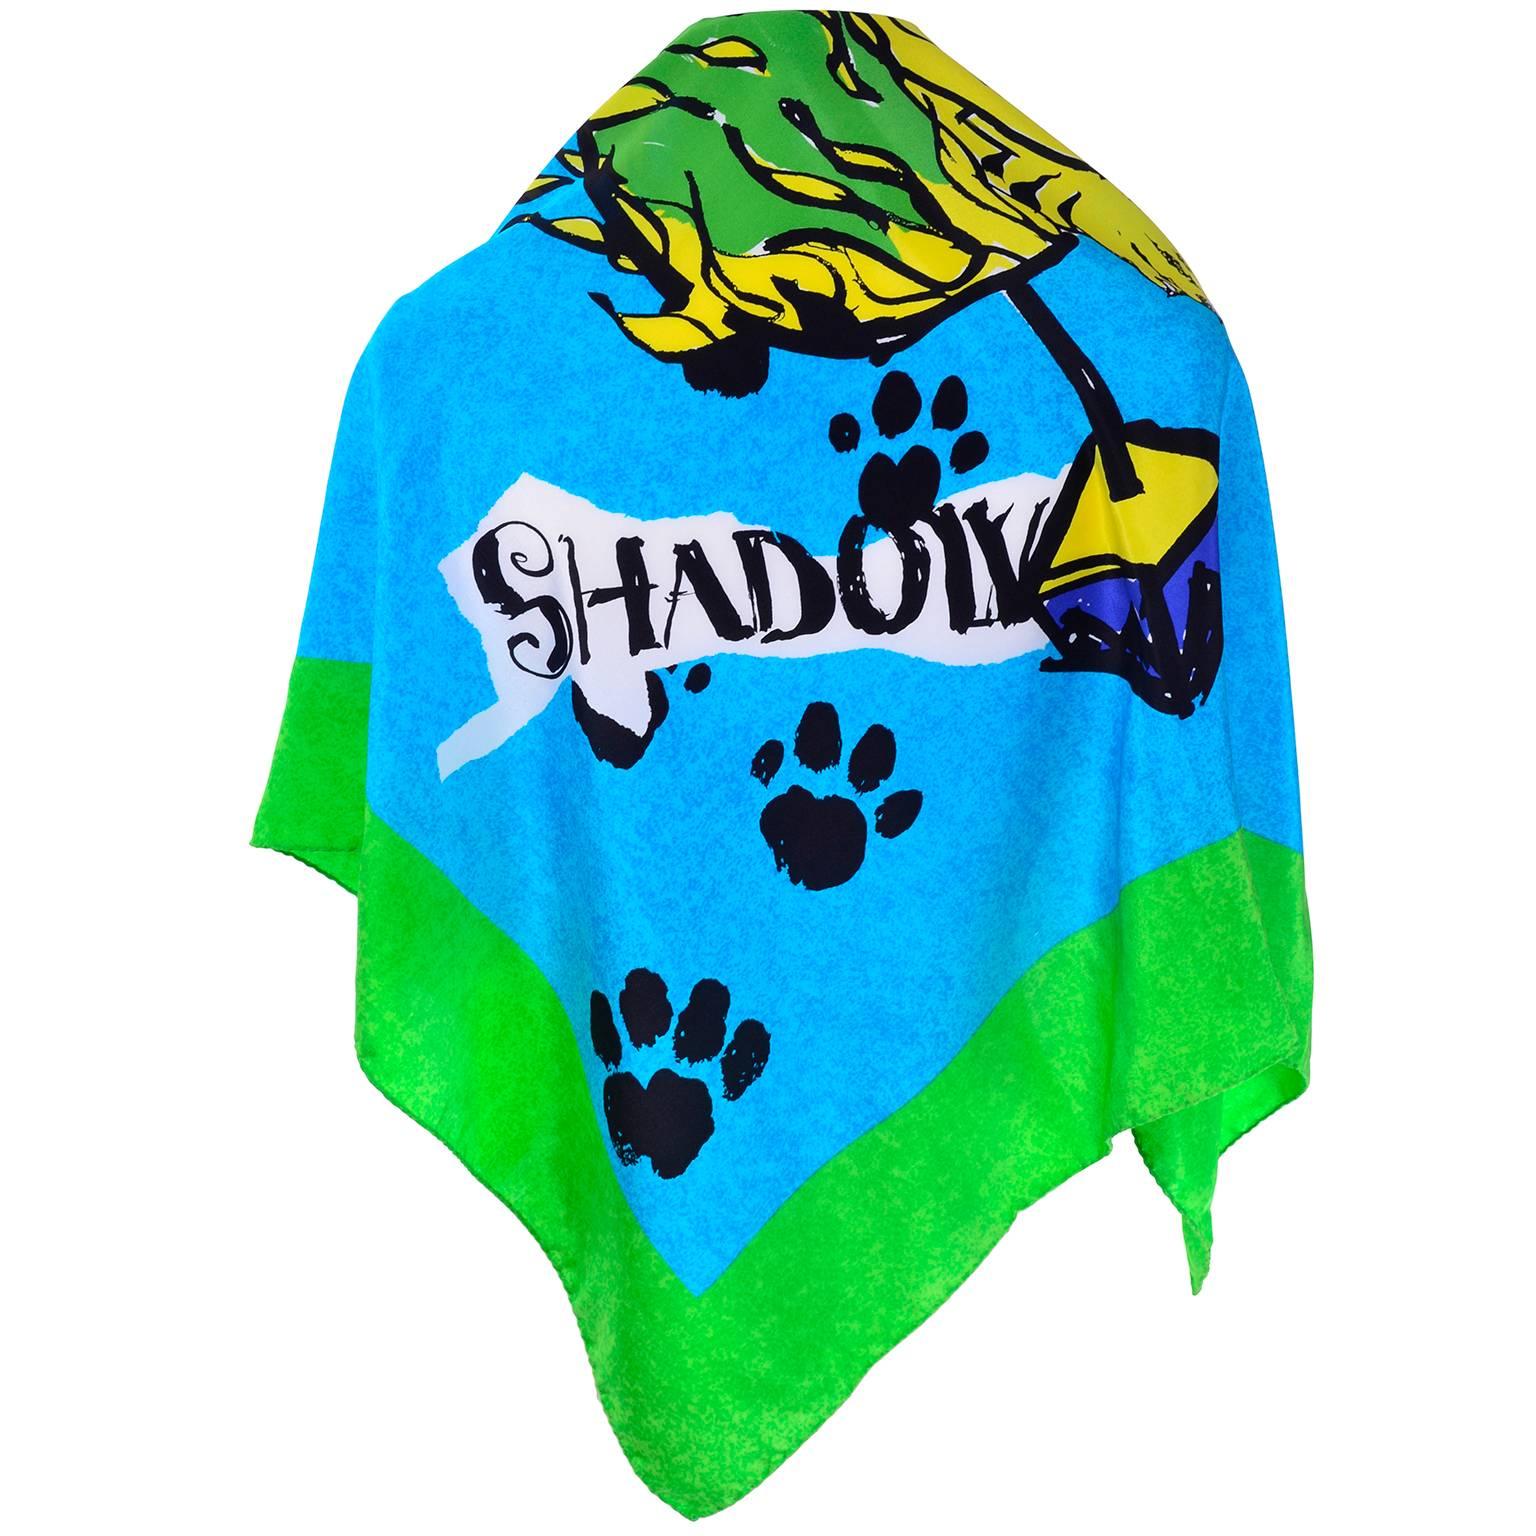 This fabulous vintage 1980's scarf from Escada is in blue and green mottled silk with the words Tiger, Munich and Shadow and images of tigers and tiger footprints. The scarf measures 35